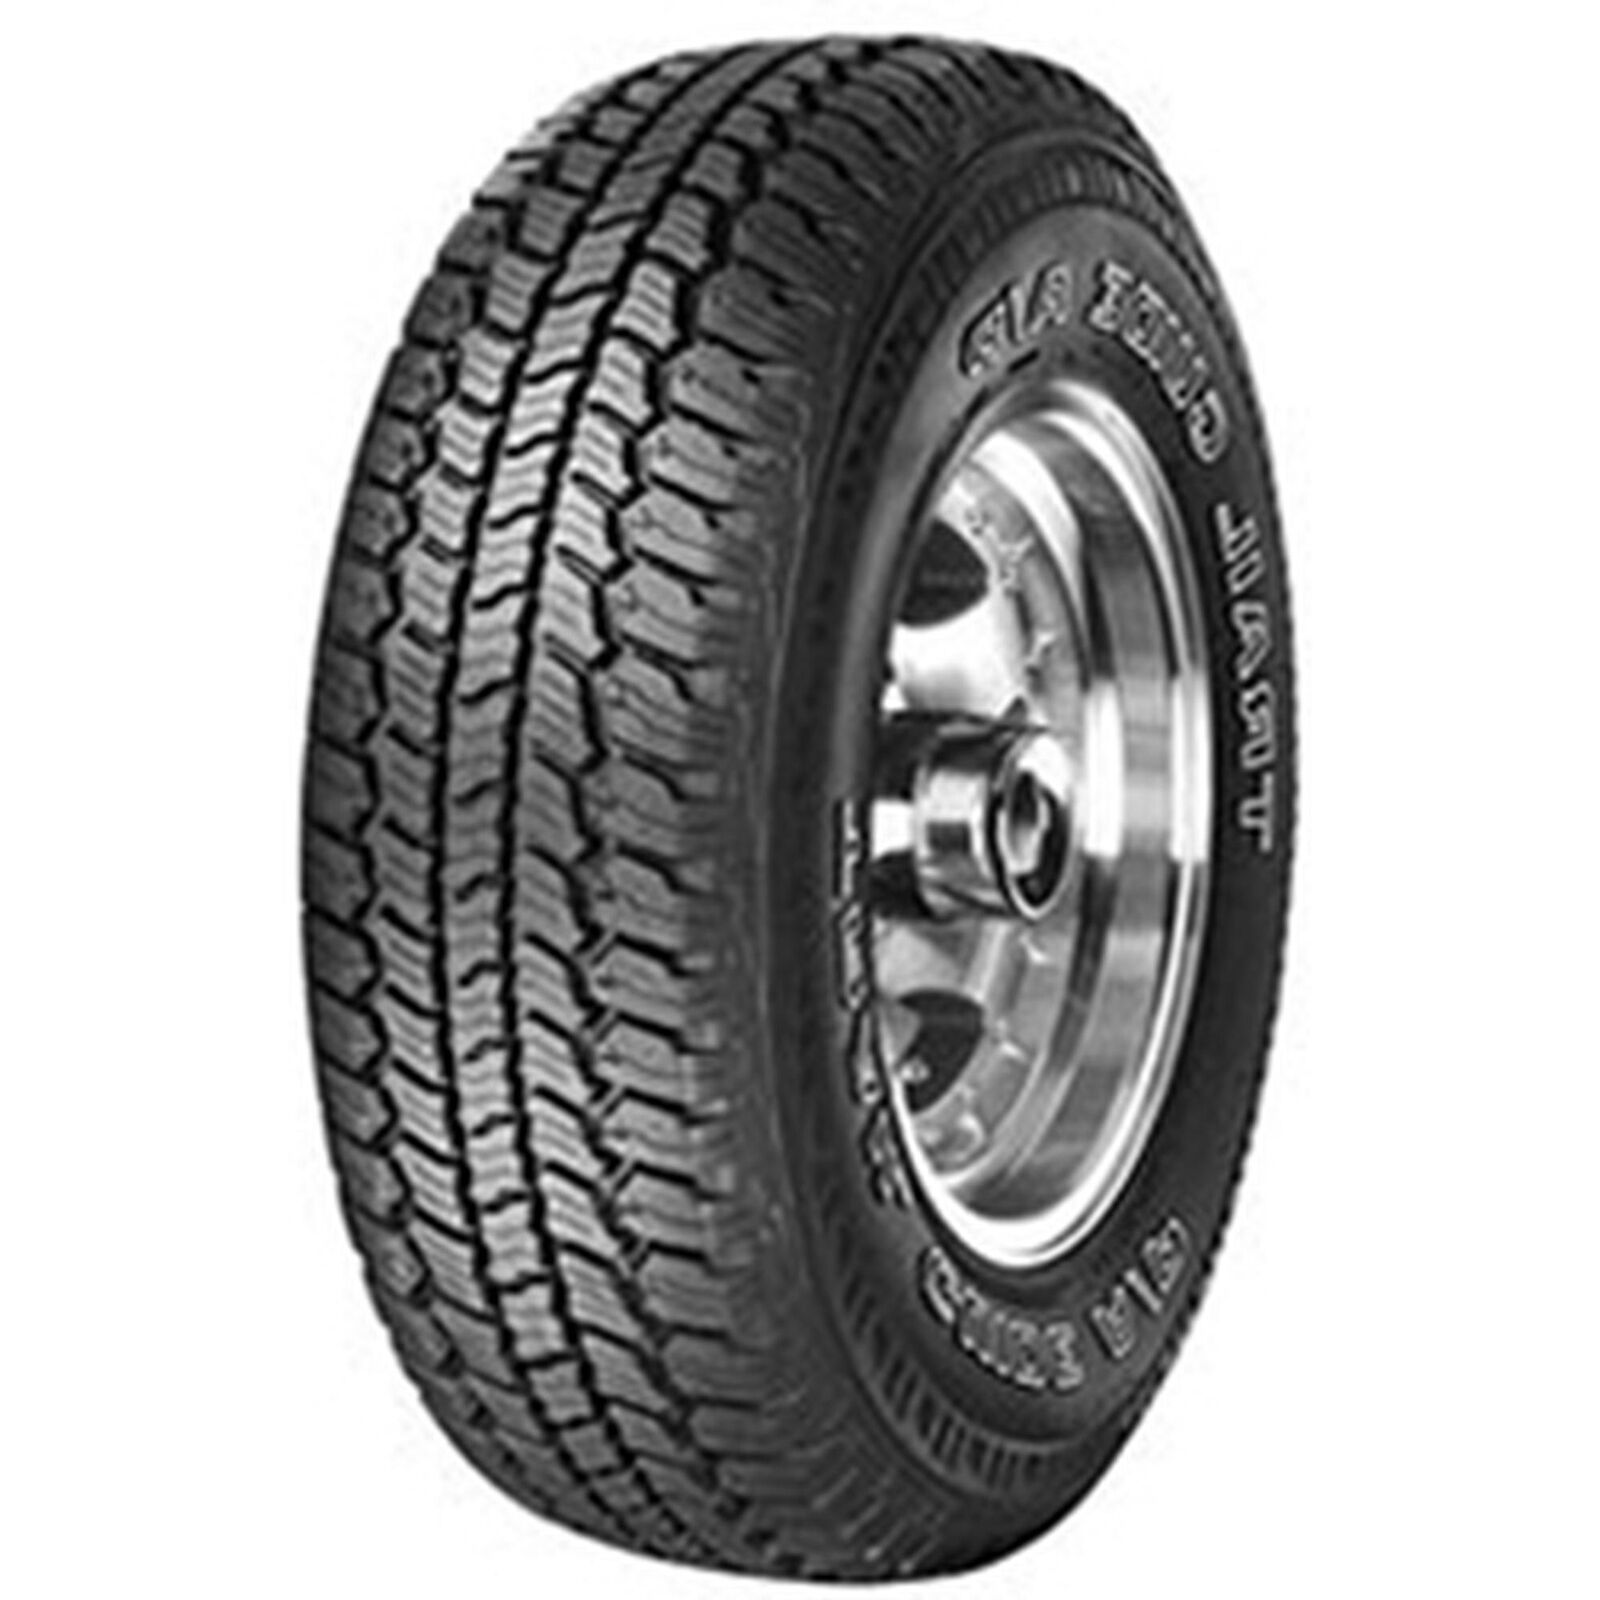 4 New Sigma Trail Guide A/t  - P265x70r16 Tires 2657016 265 70 16